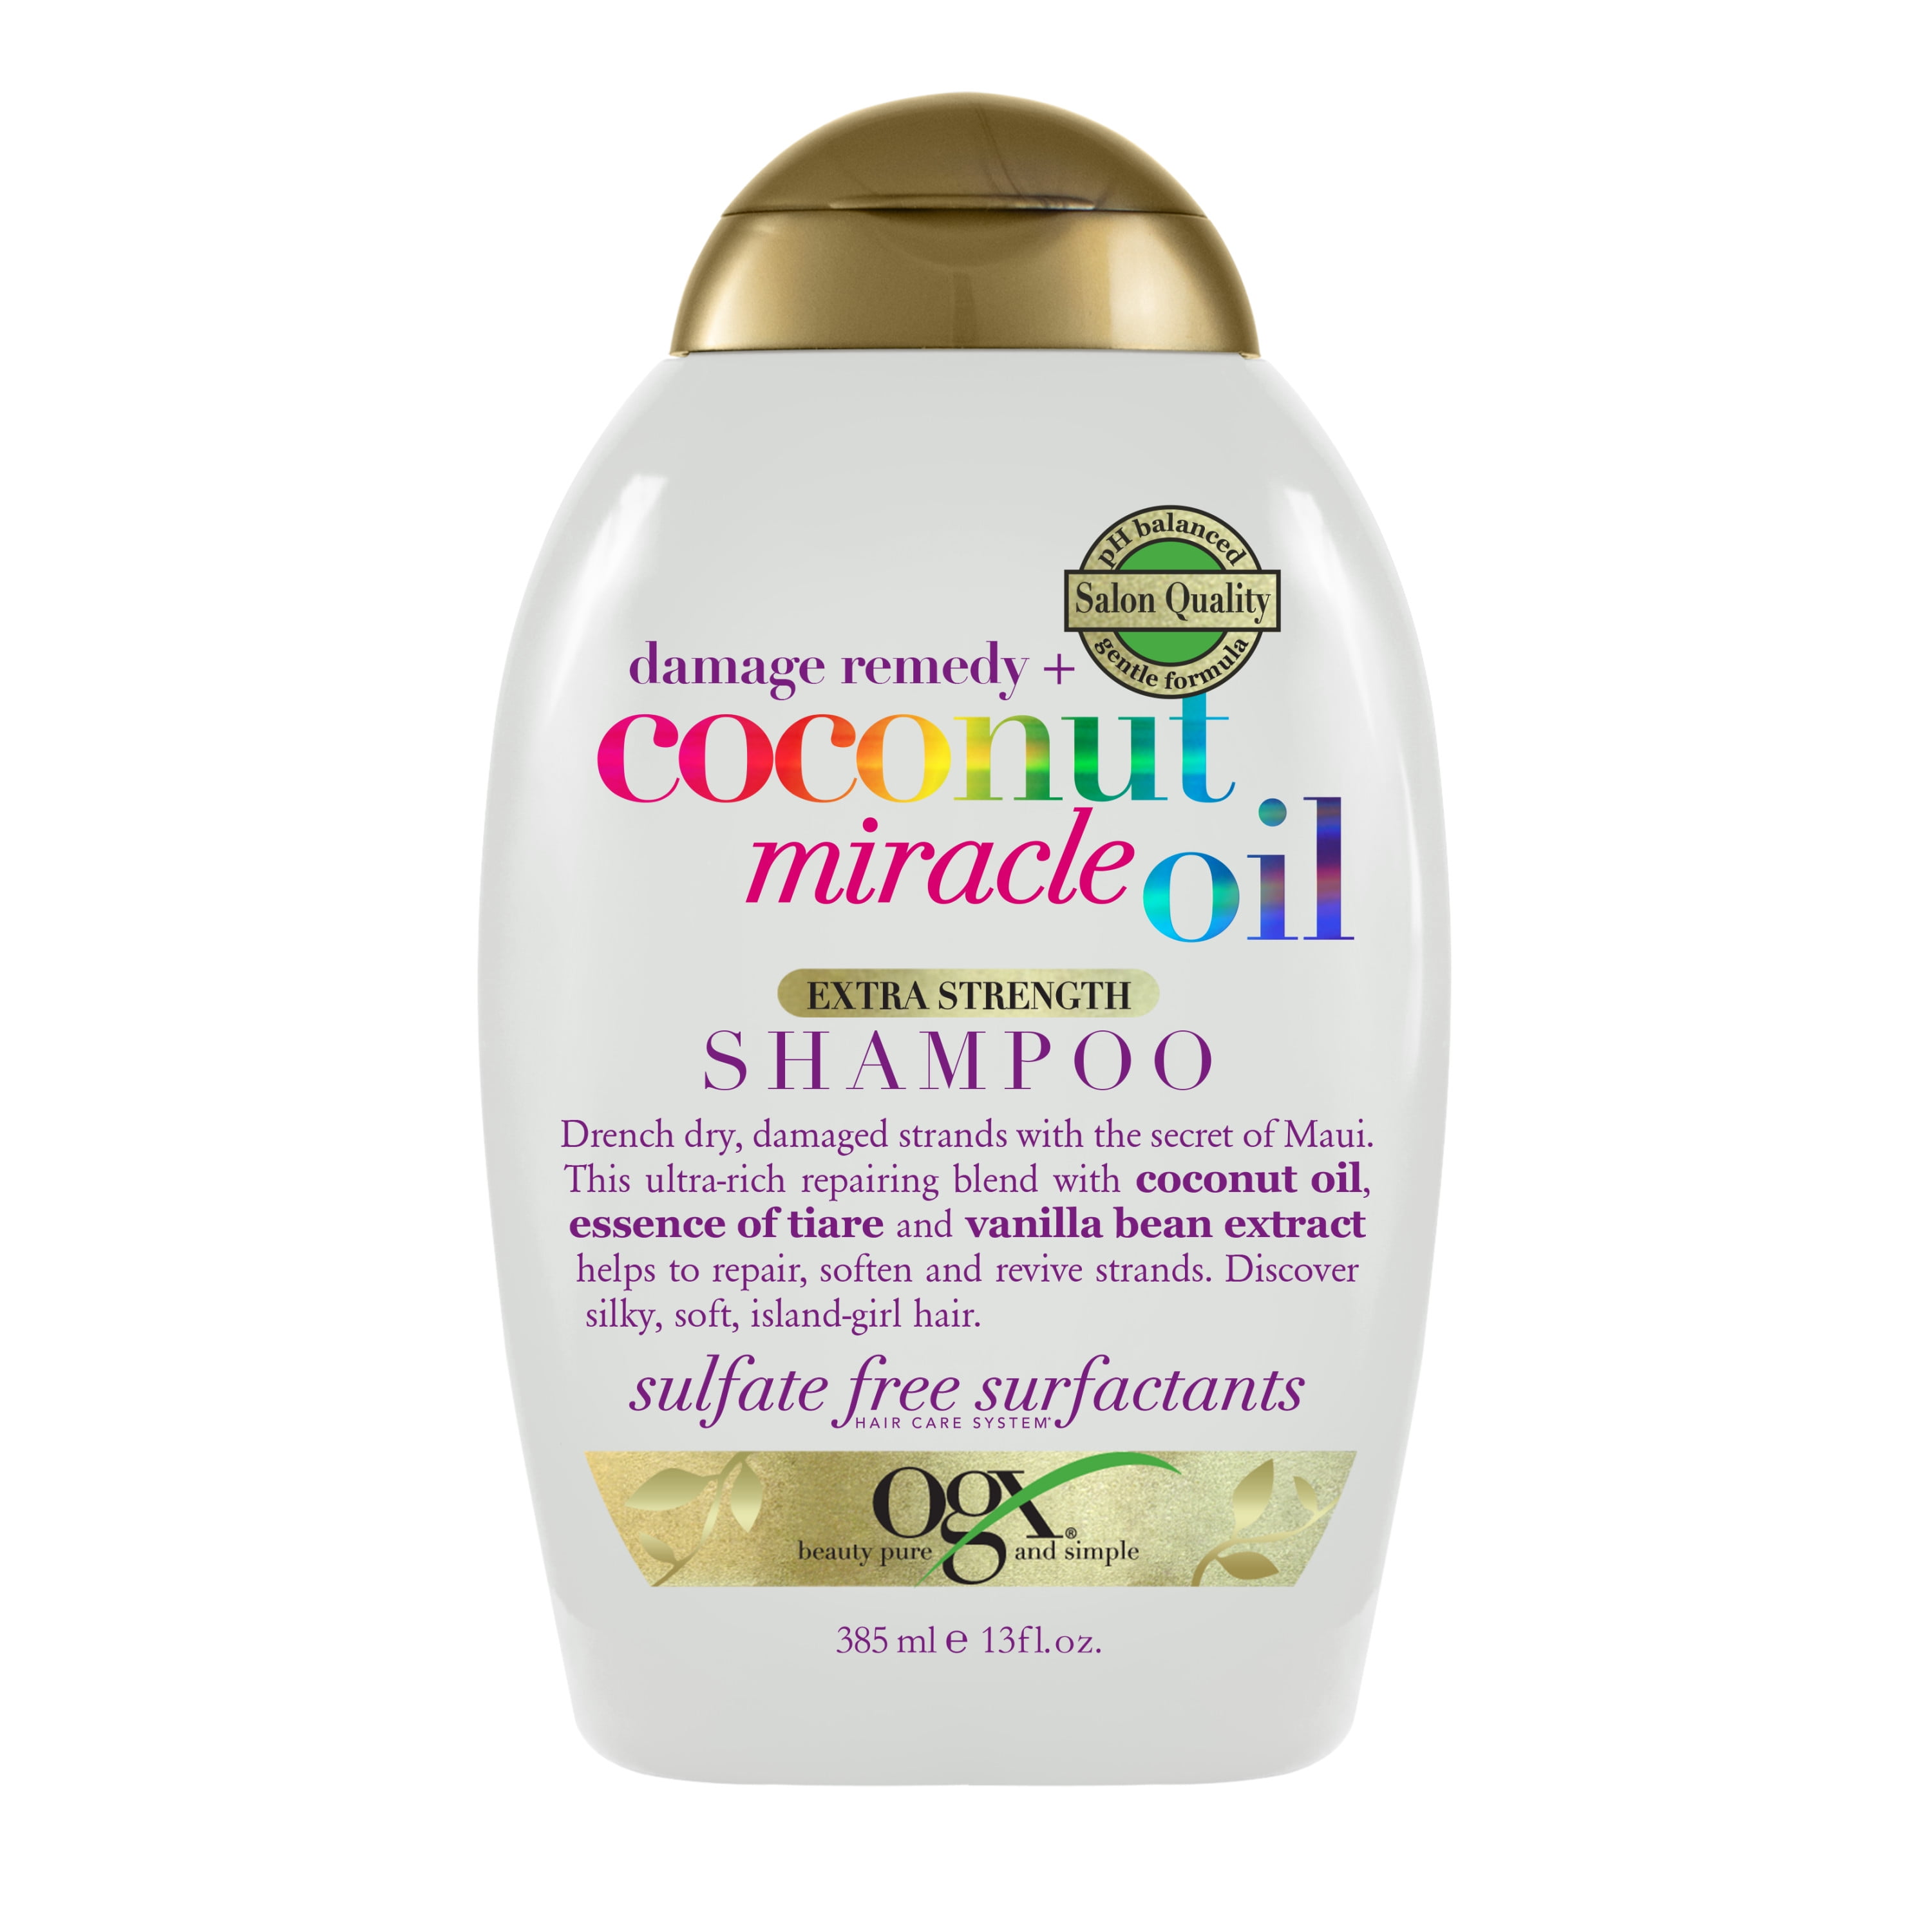 OGX Extra Strength Remedy + Coconut Miracle Oil Repairing Daily Shampoo, oz Walmart.com